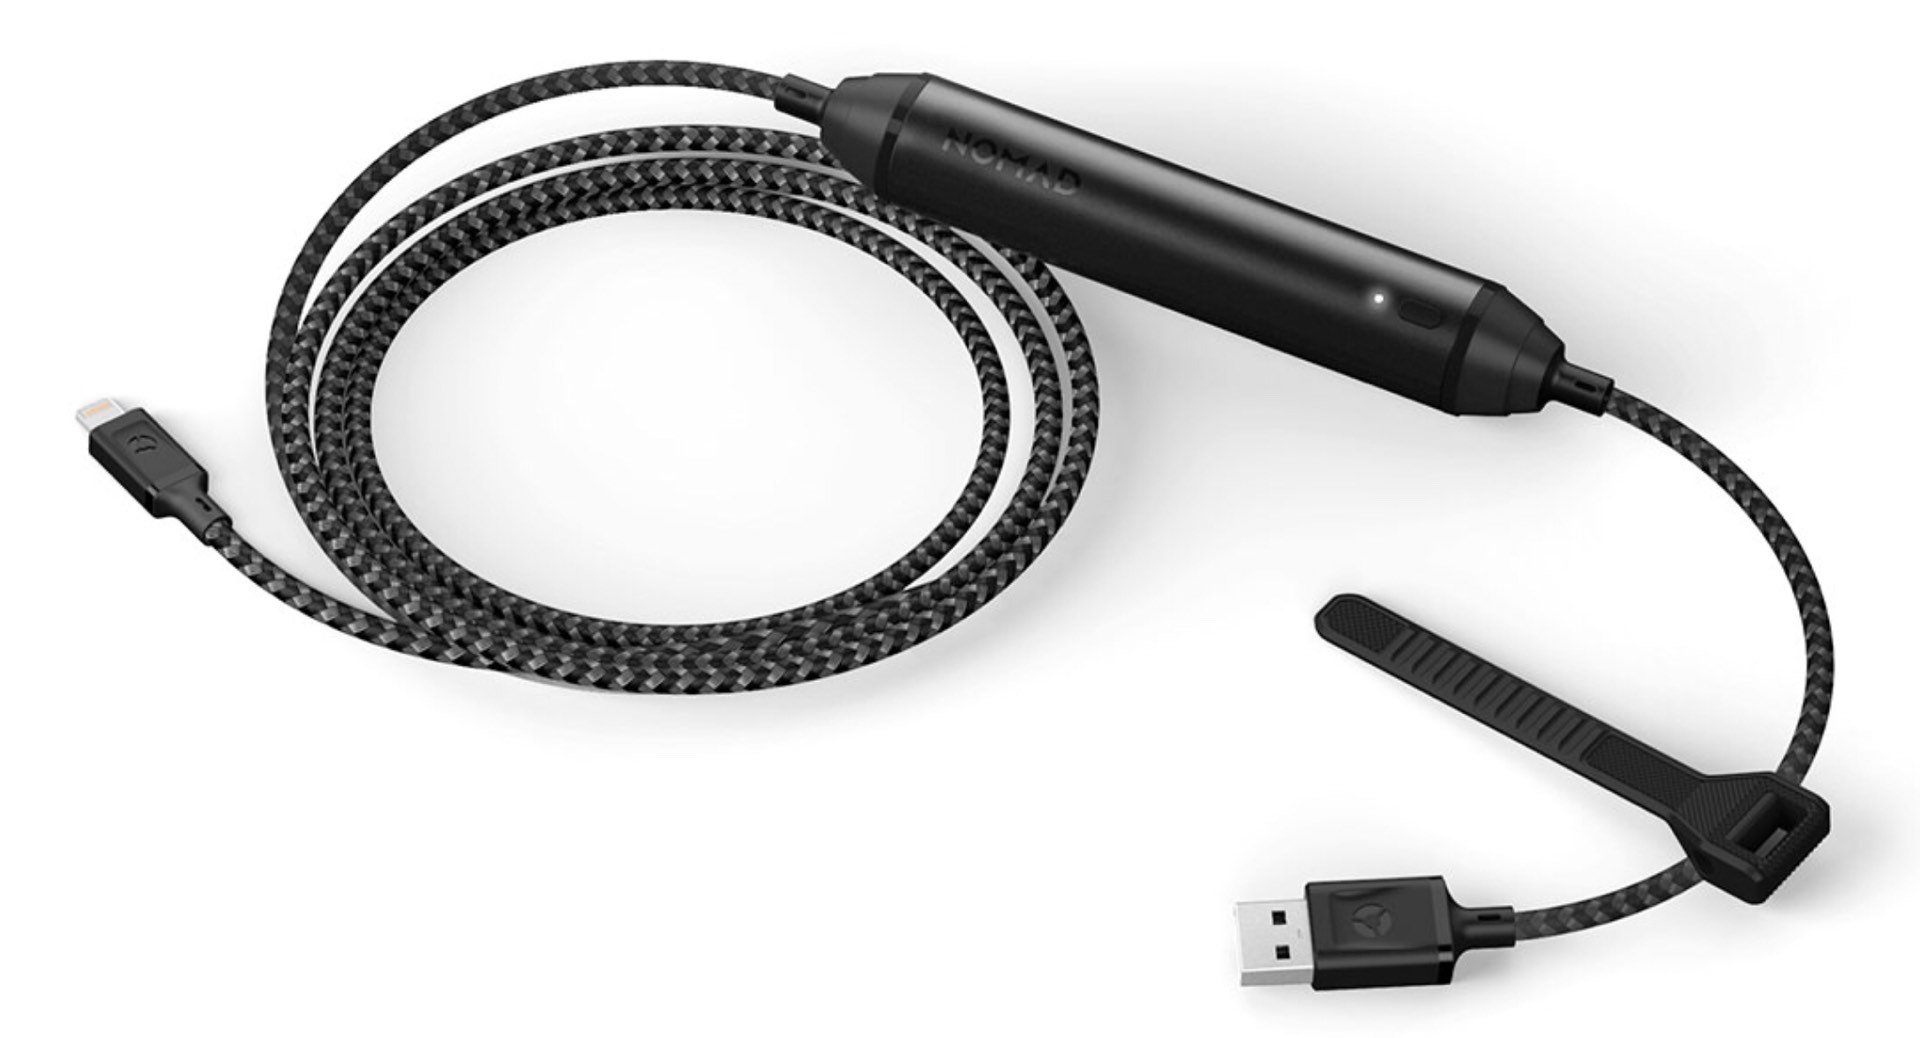 nomad-battery-cable-2-0